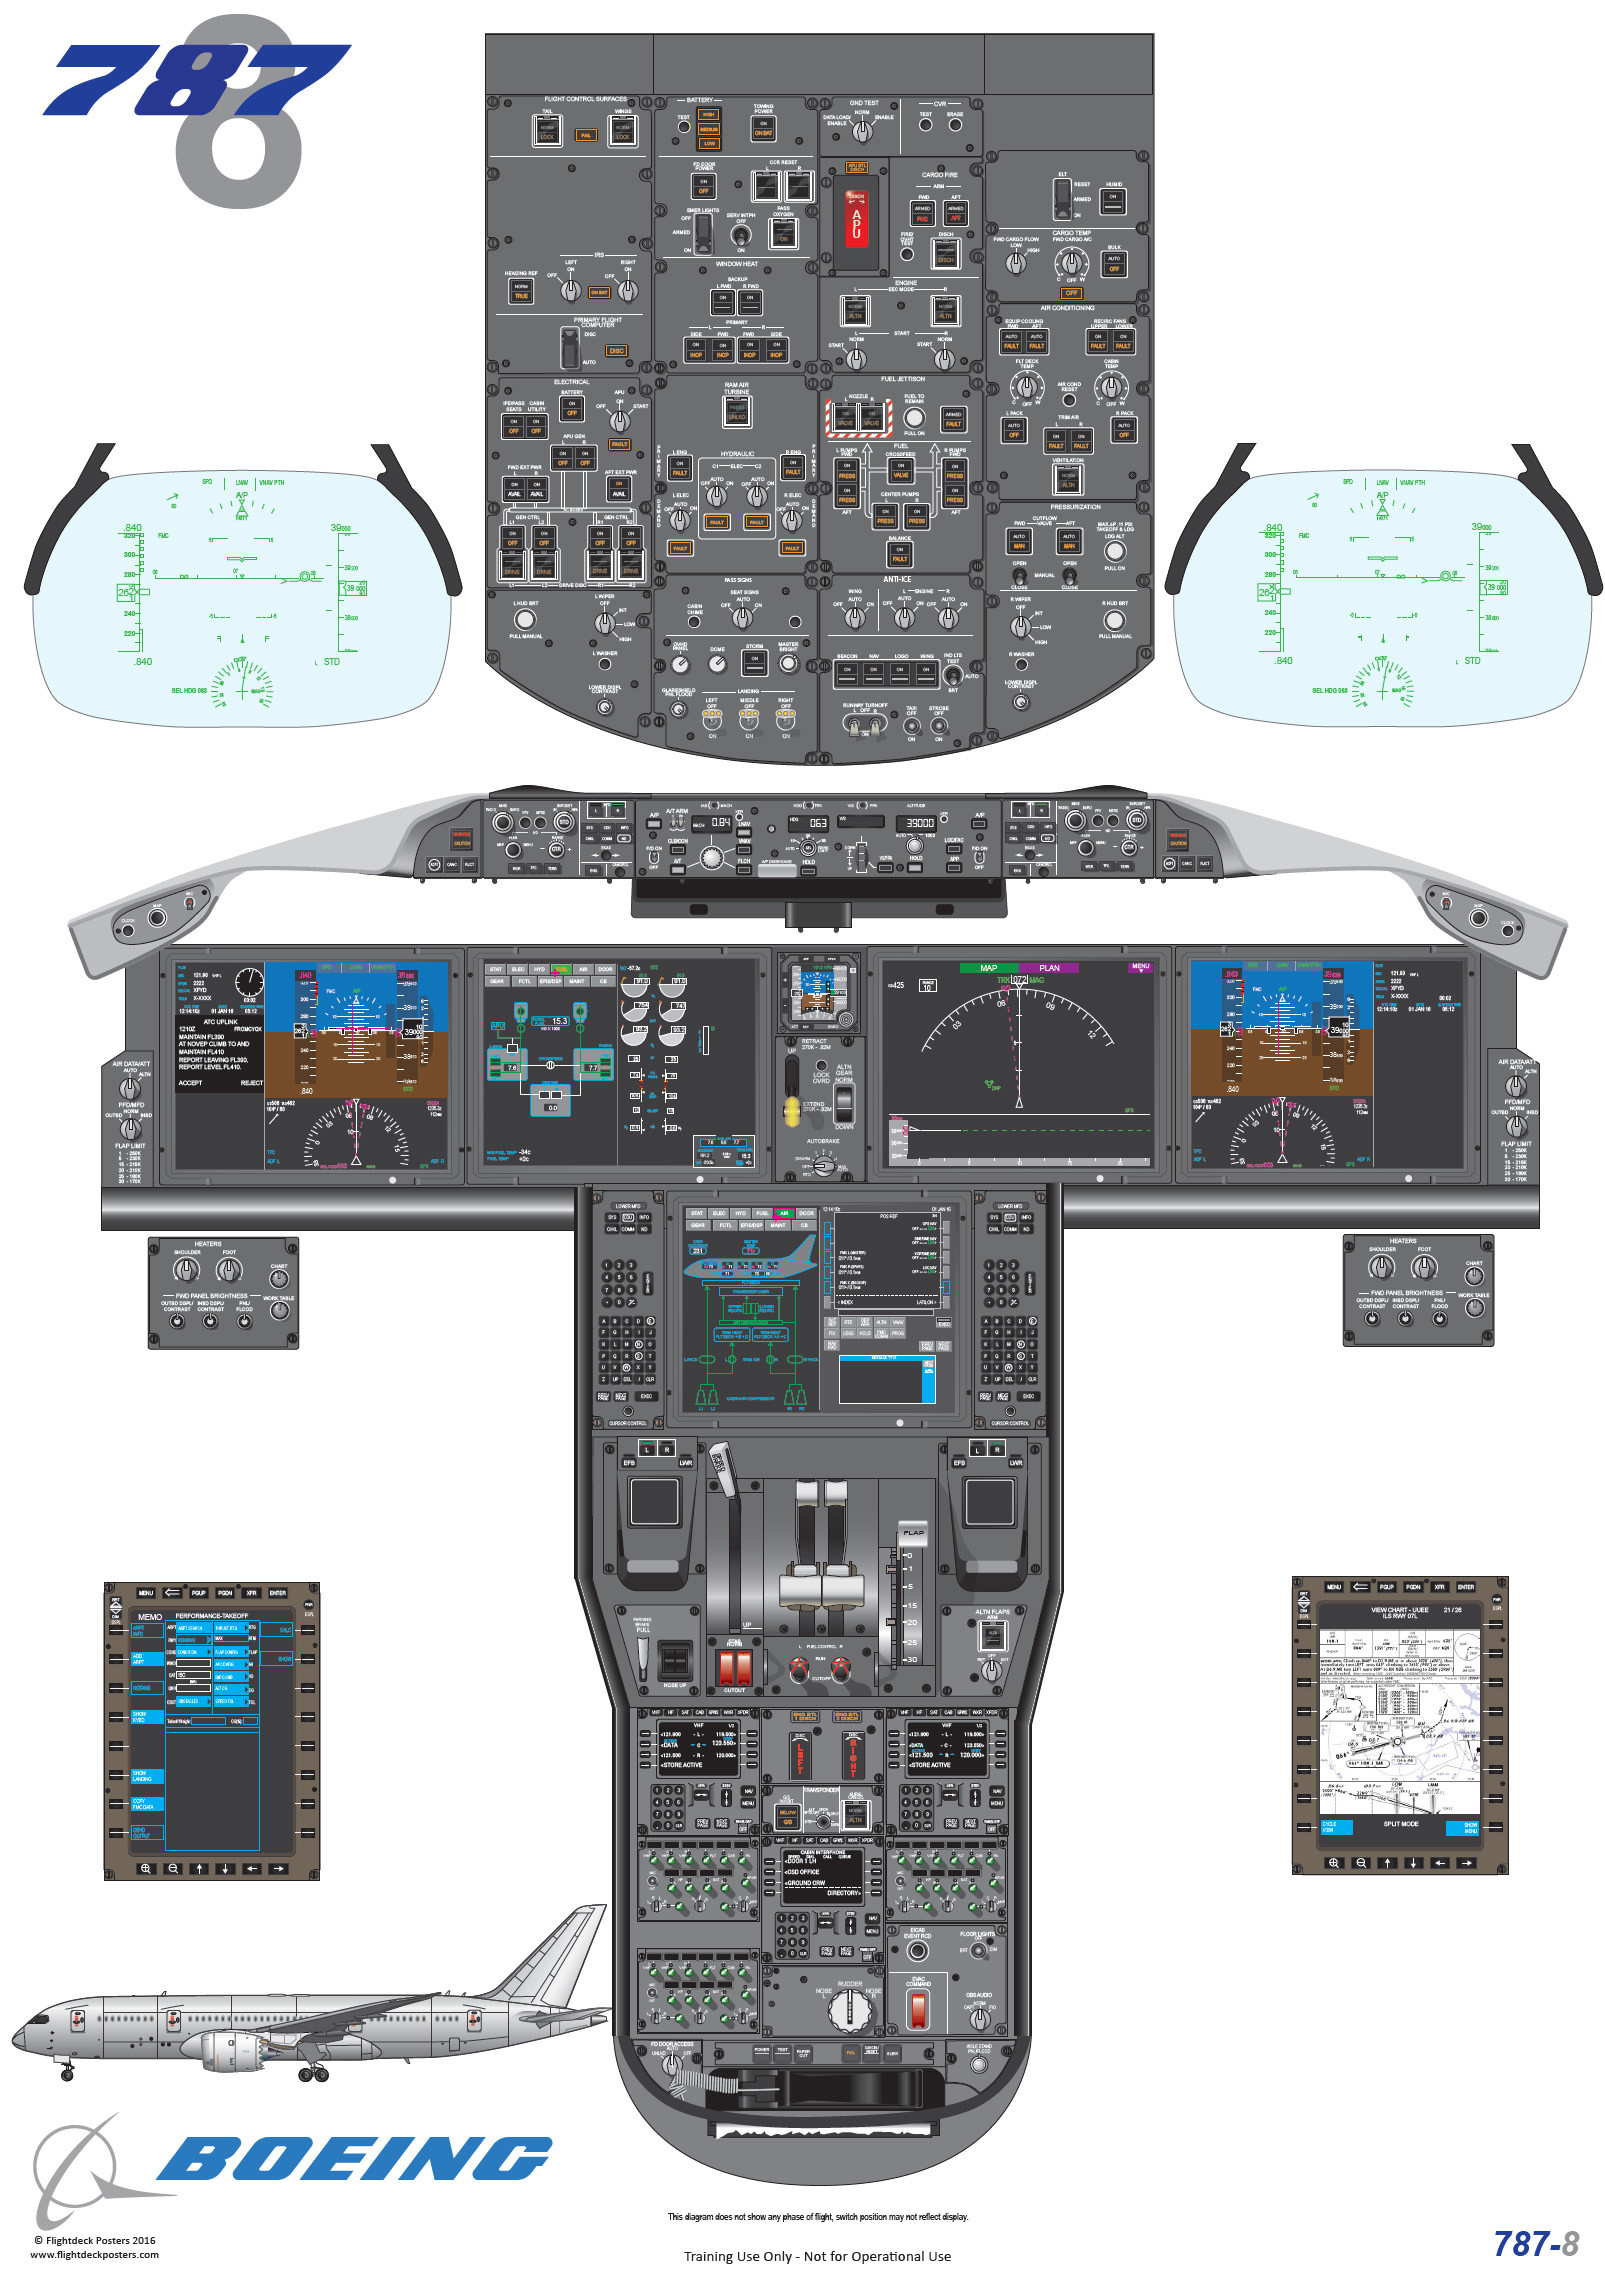 Boeing 787-8 cockpit diagram, used for training pilots